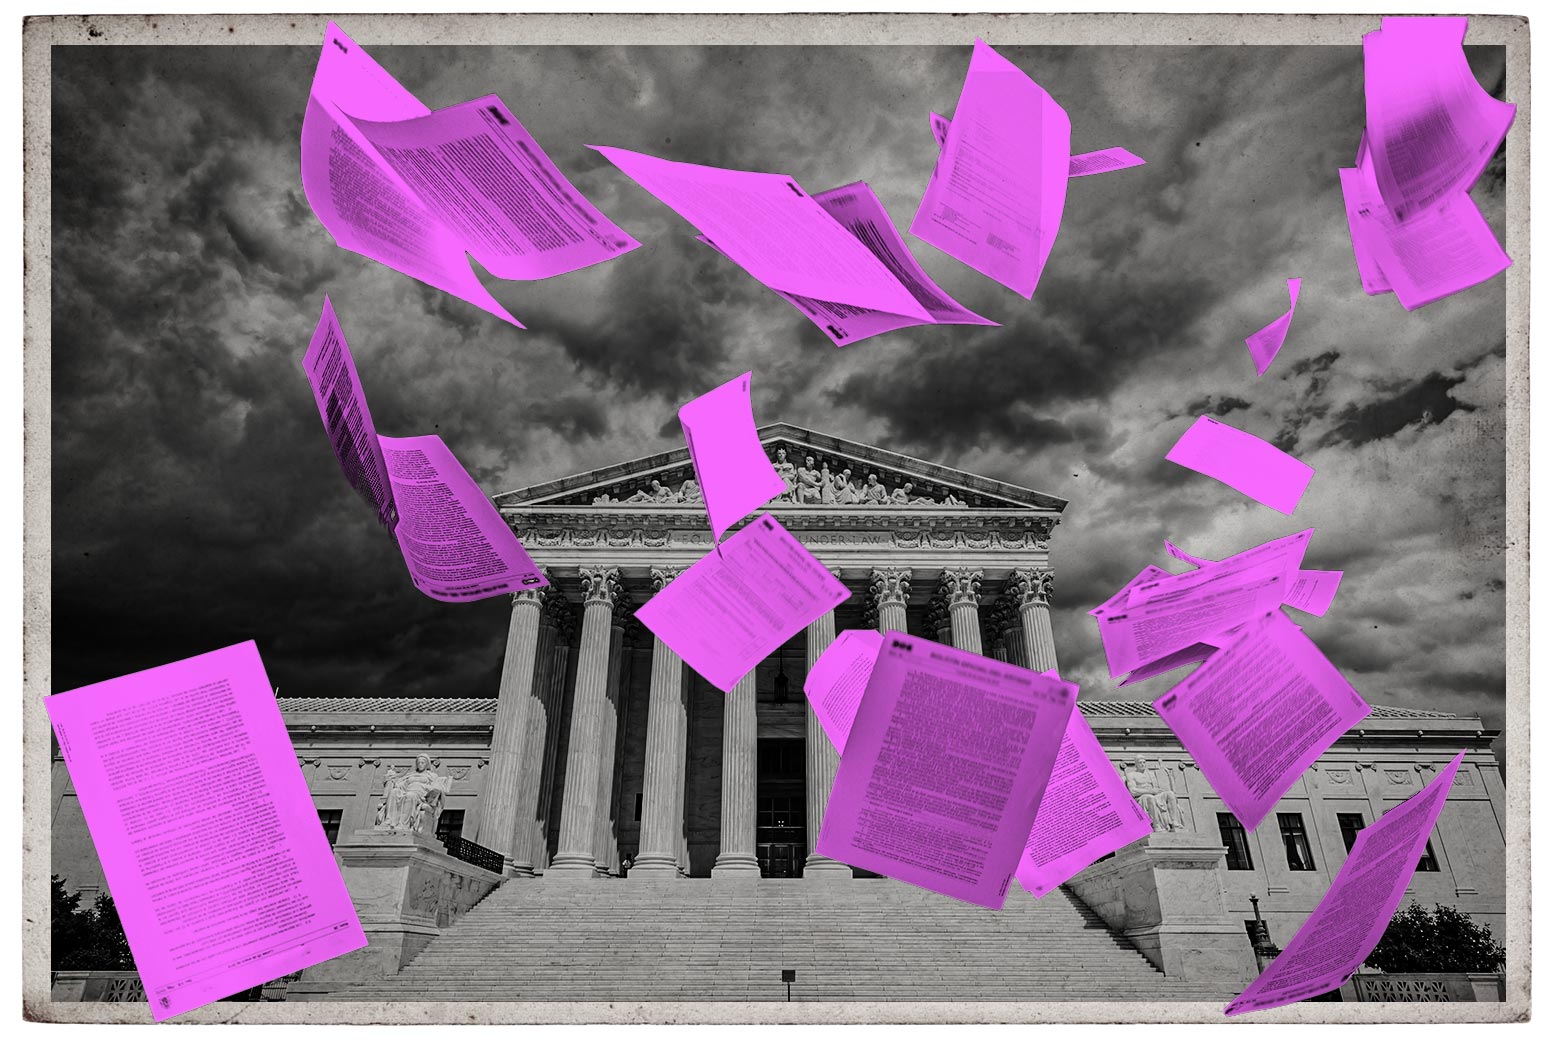 Multiple purple sheets of paper fall from the sky in front of a black-and-white image of the steps leading up to the Supreme Court.